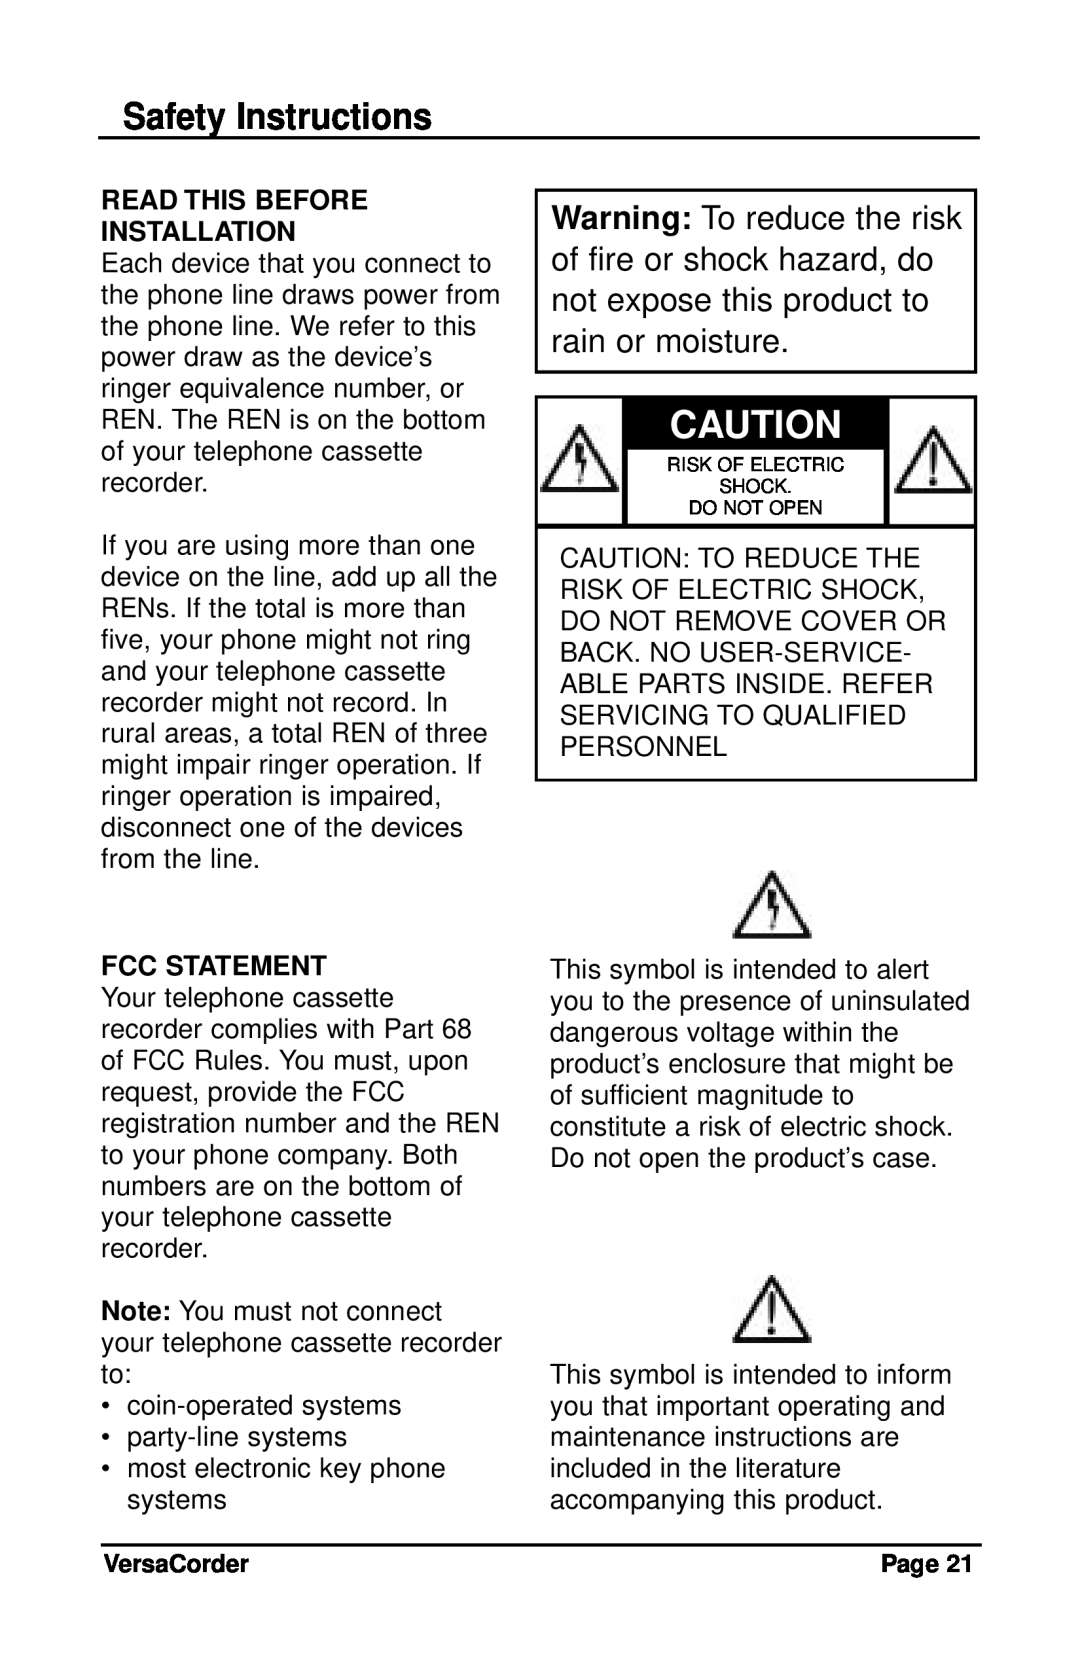 C. Crane VersaCorder Dual Speed Recorder instruction manual Safety Instructions, Read This Before Installation 